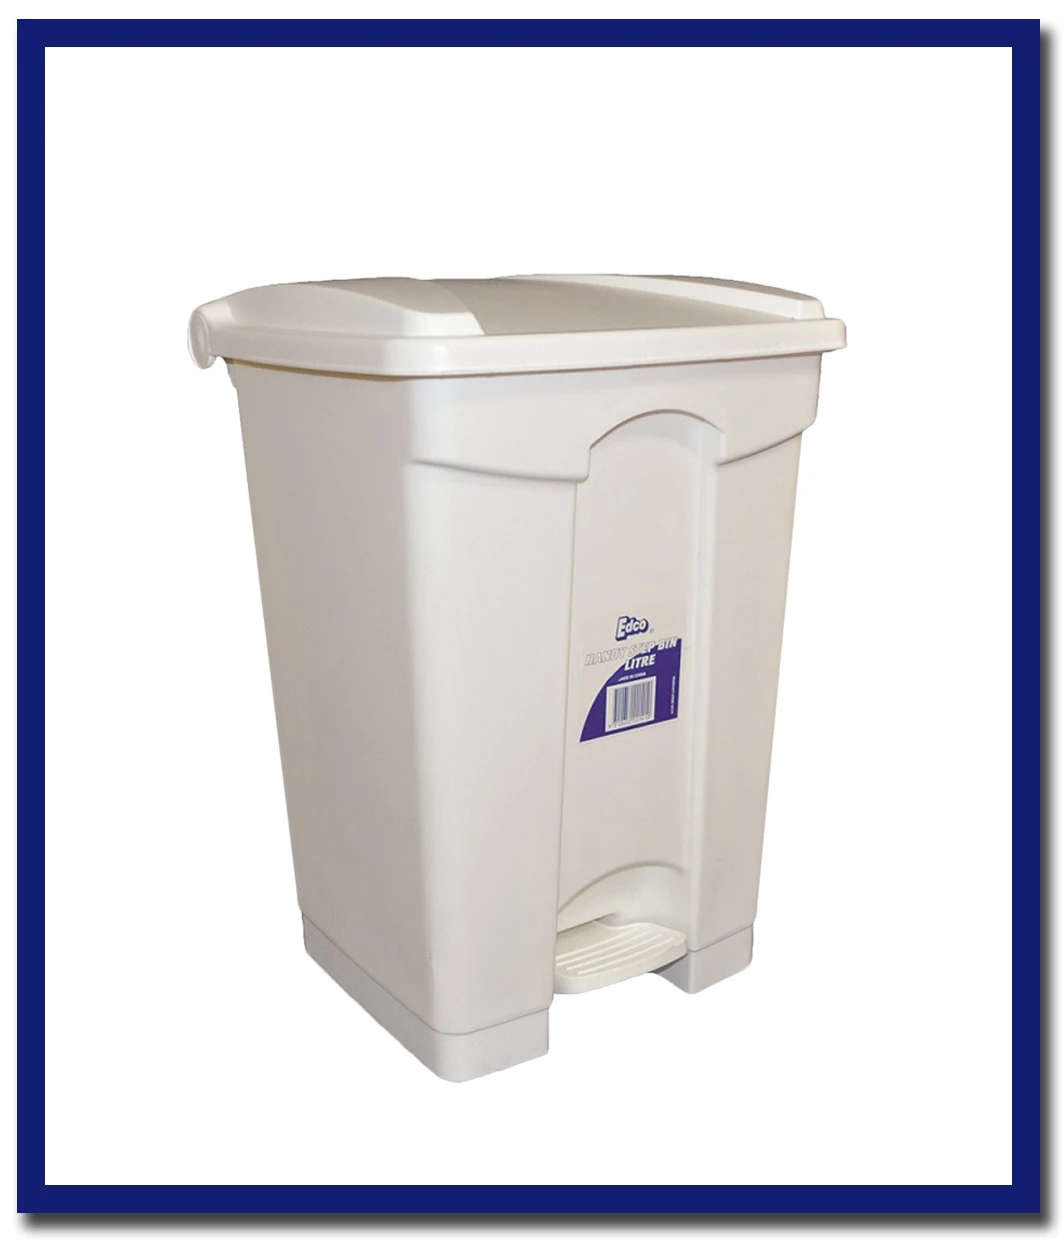 Edco Handy Step Bin With Pedal (Assembled) - 1 Unit - Stone Doctor Australia - Cleaning Accessories > Bins > Pedal Bins